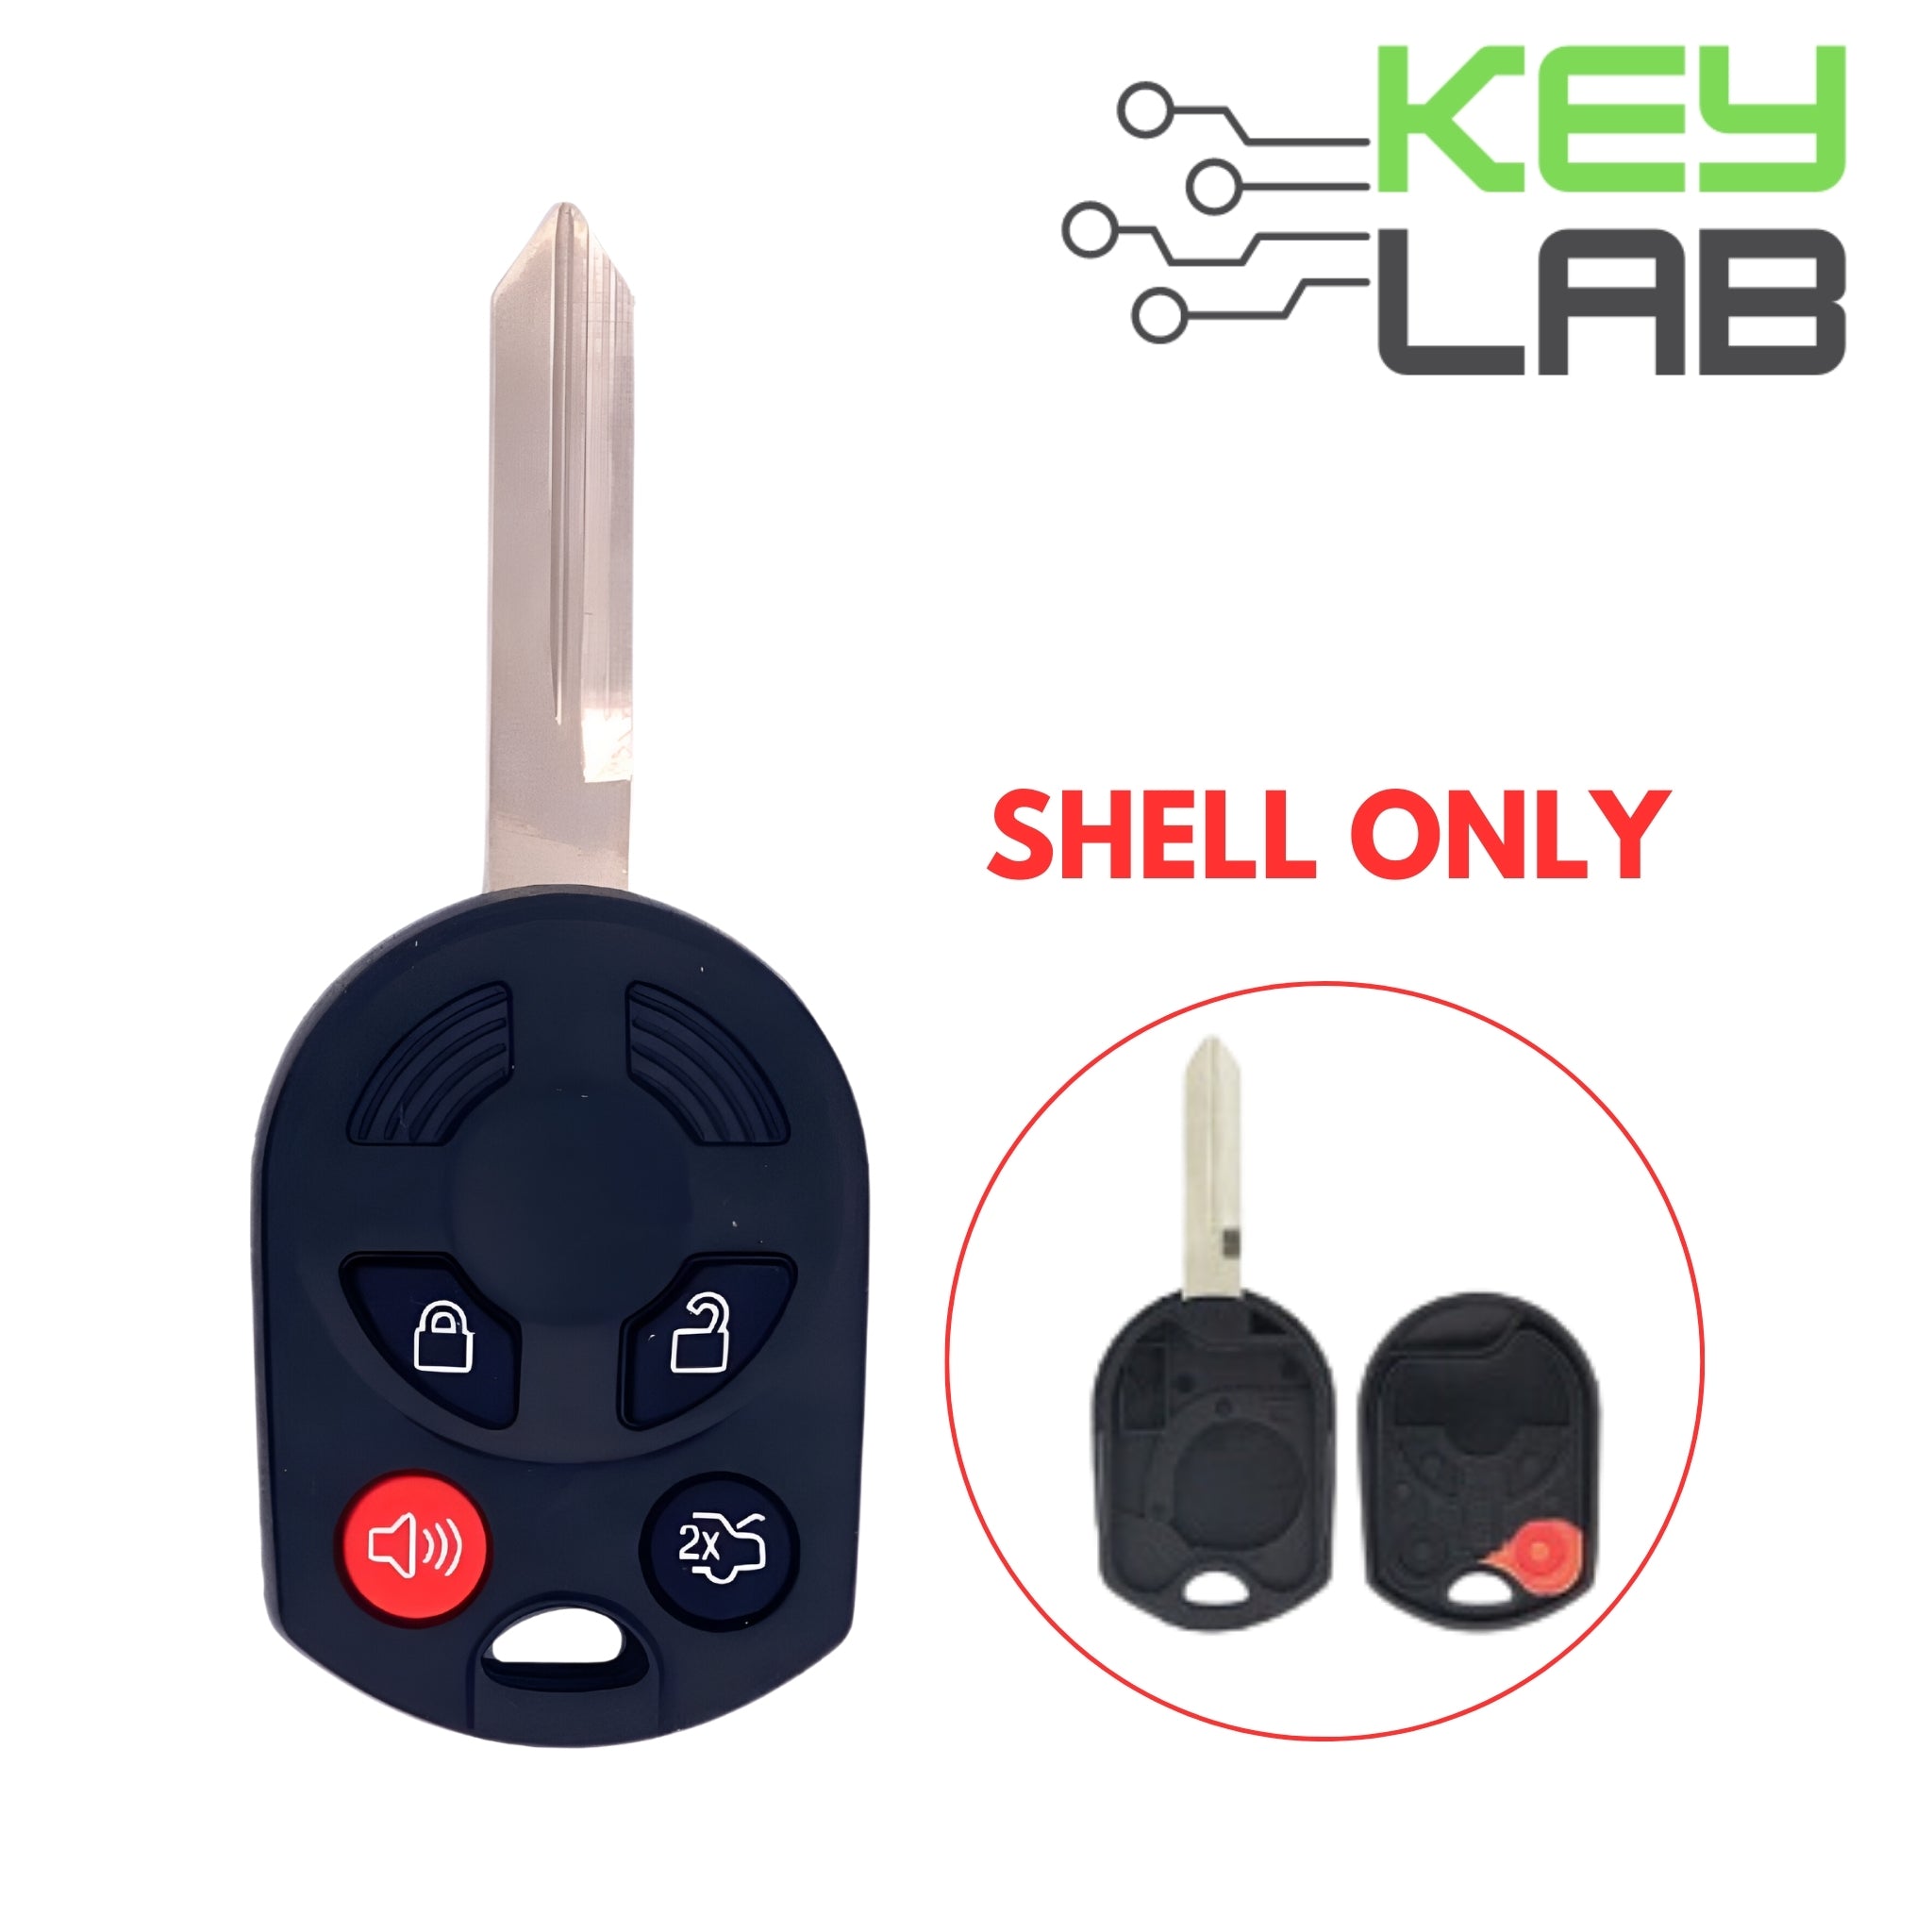 Ford 2007-2011 Remote Head Key 4B SHELL for OUCD6000022 - Royal Key Supply